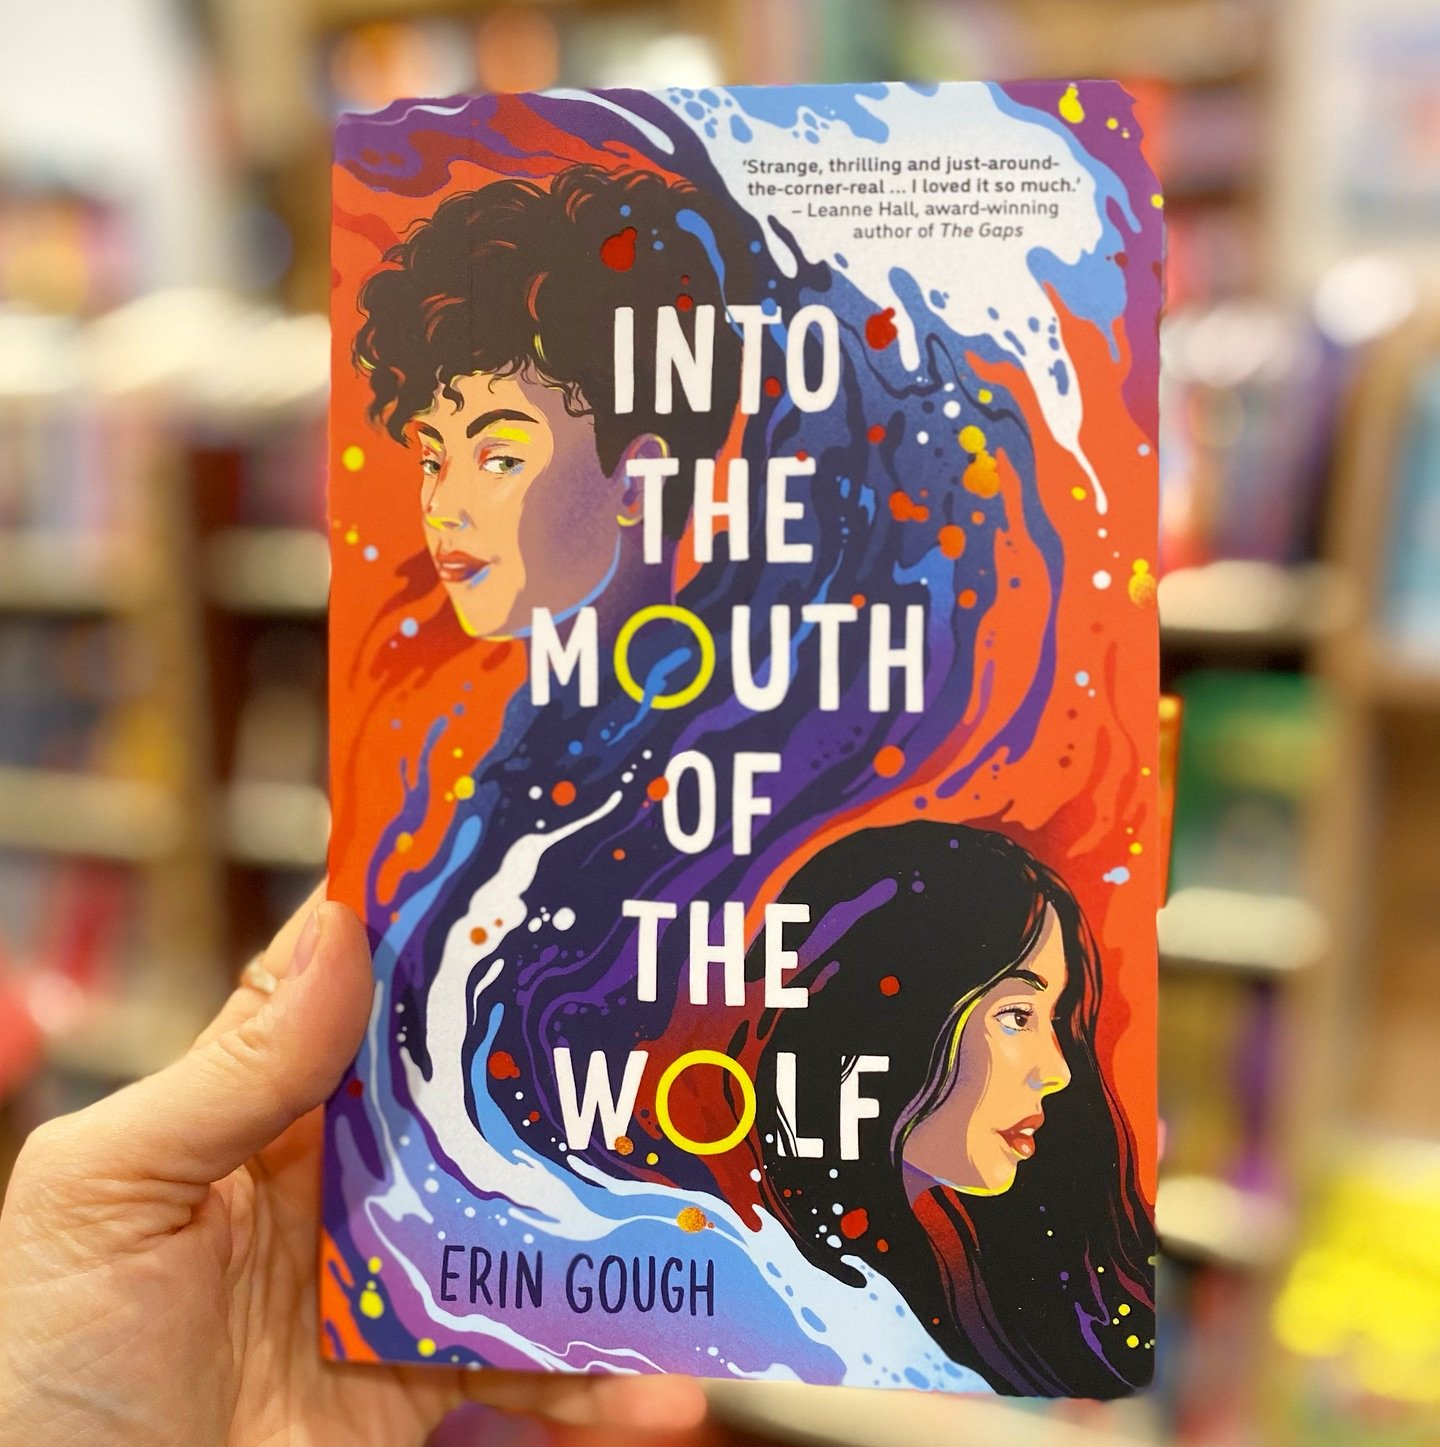 &lsquo;Friday&rsquo; Favourite. This young adult book by Erin Gough is a wonderful ride. Part thriller, part queer romance, &lsquo;Into the Mouth of the Wolf&rsquo; is set in what&rsquo;s looking like my favourite book setting lately: a dystopian nea